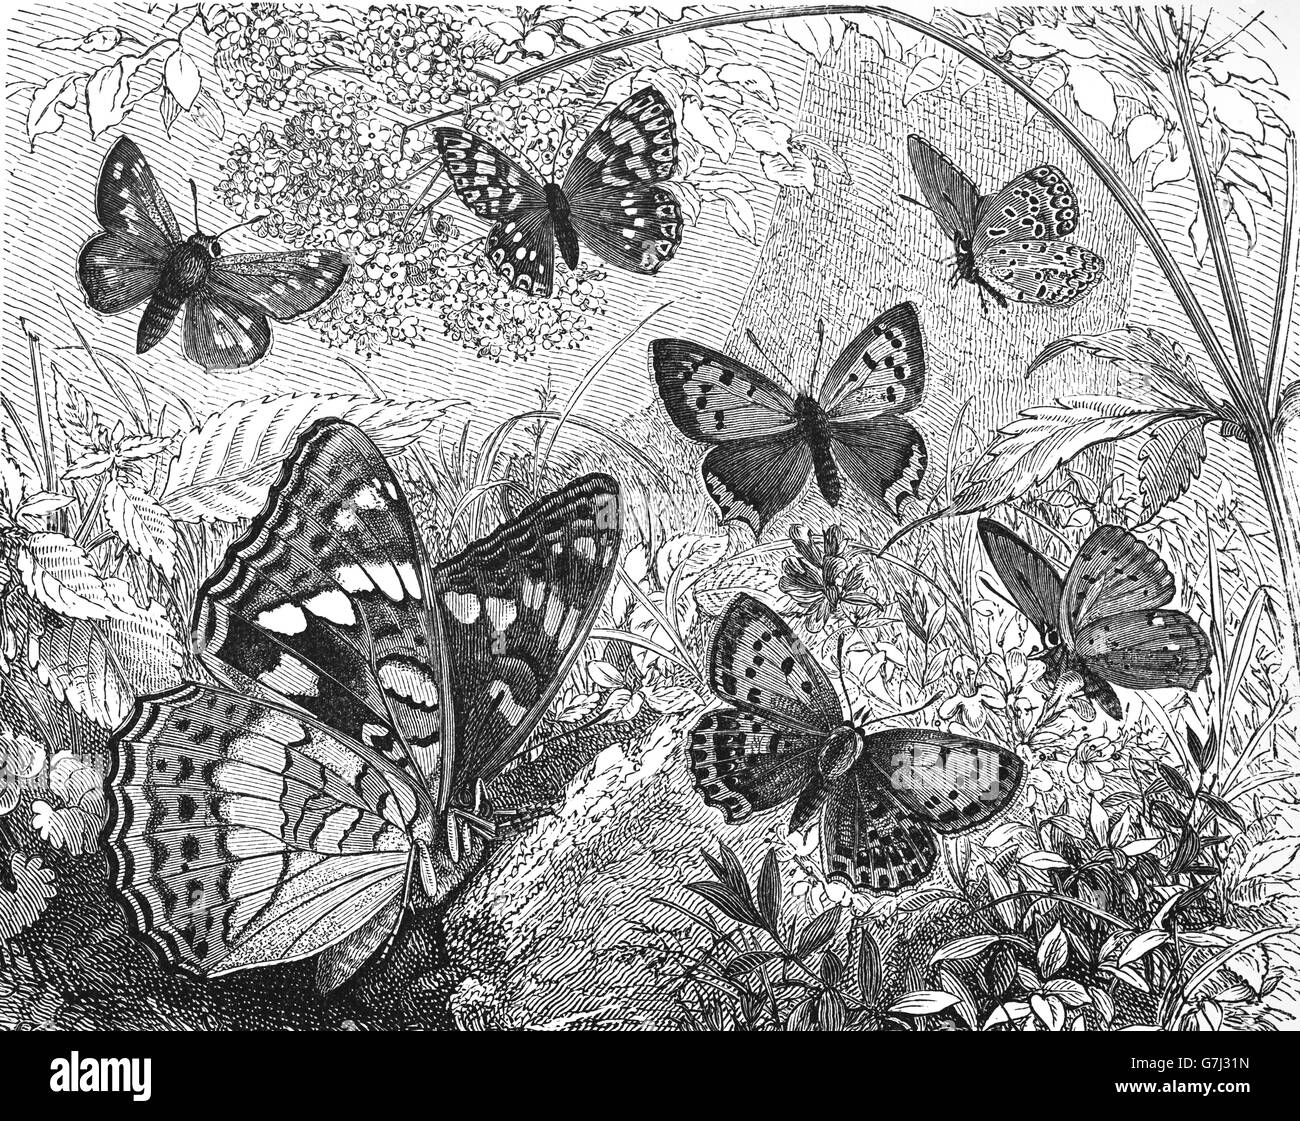 Butterflies in the garden, illustration from book dated 1904 Stock Photo